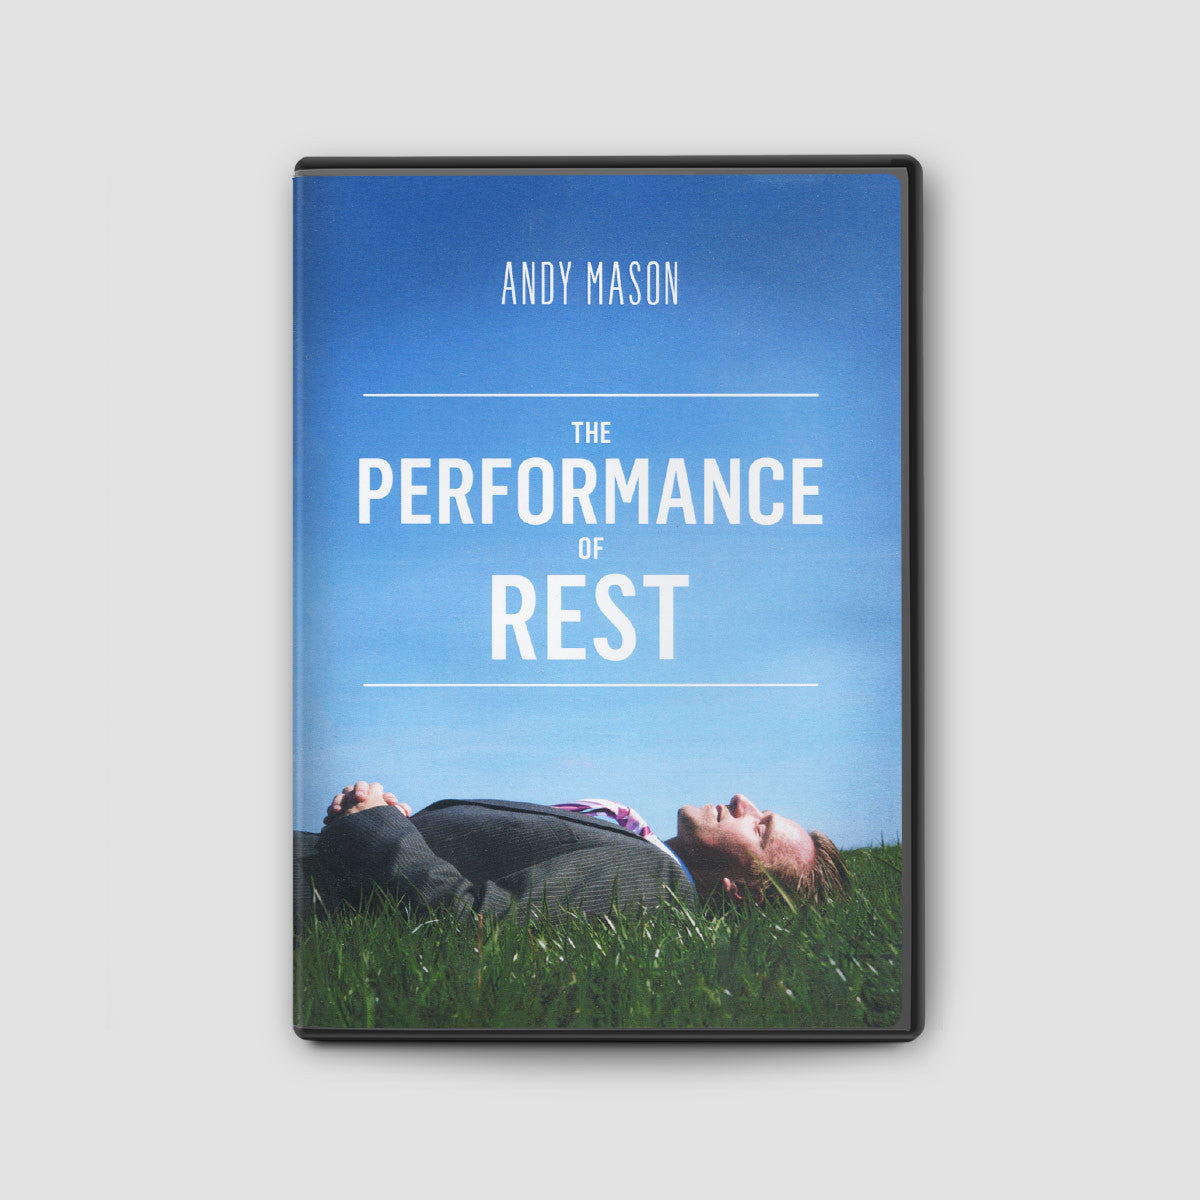 The Performance of Rest